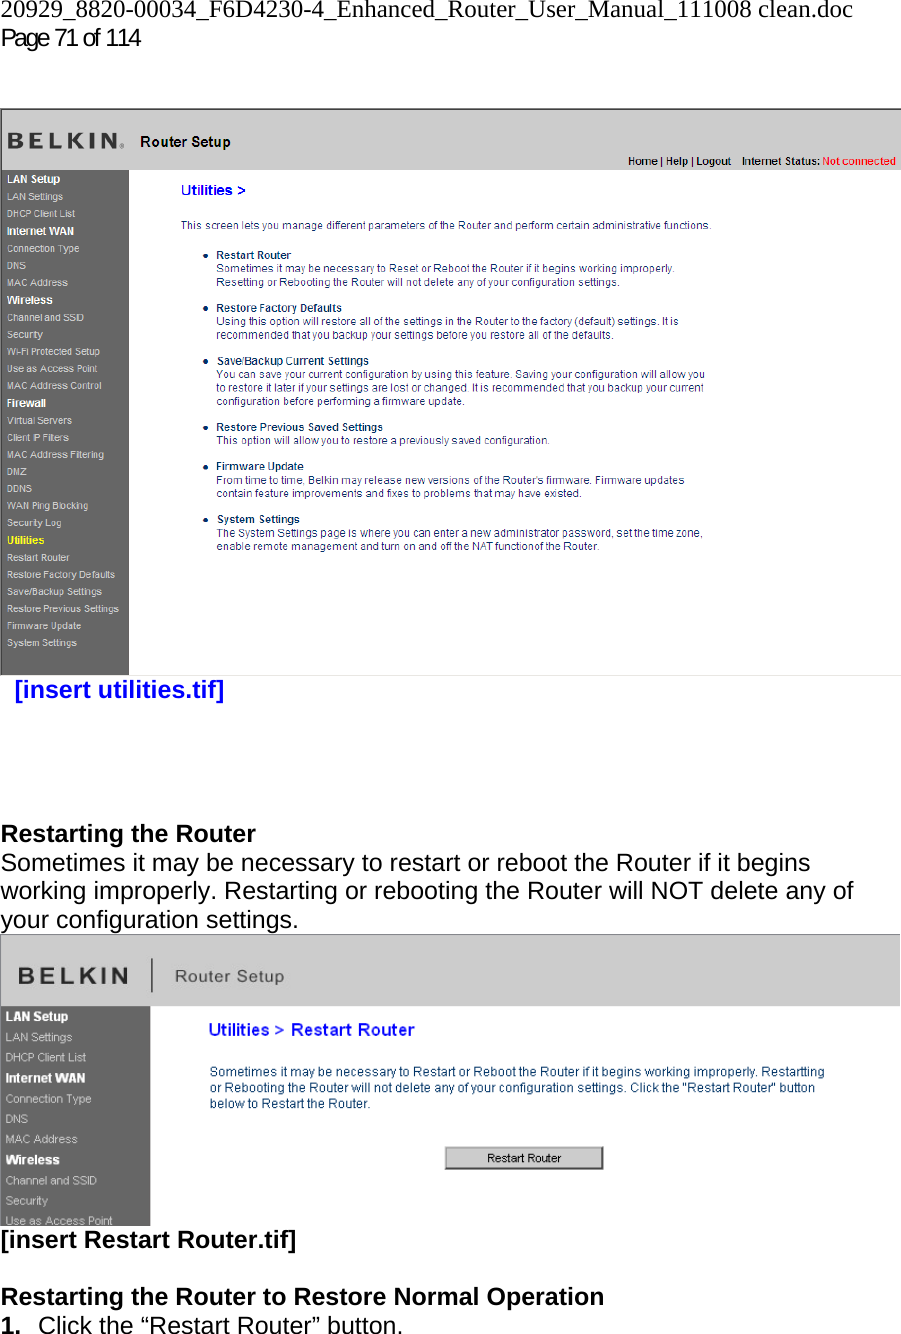 20929_8820-00034_F6D4230-4_Enhanced_Router_User_Manual_111008 clean.doc Page 71 of 114      [insert utilities.tif]     Restarting the Router Sometimes it may be necessary to restart or reboot the Router if it begins working improperly. Restarting or rebooting the Router will NOT delete any of your configuration settings.  [insert Restart Router.tif]  Restarting the Router to Restore Normal Operation 1.  Click the “Restart Router” button. 